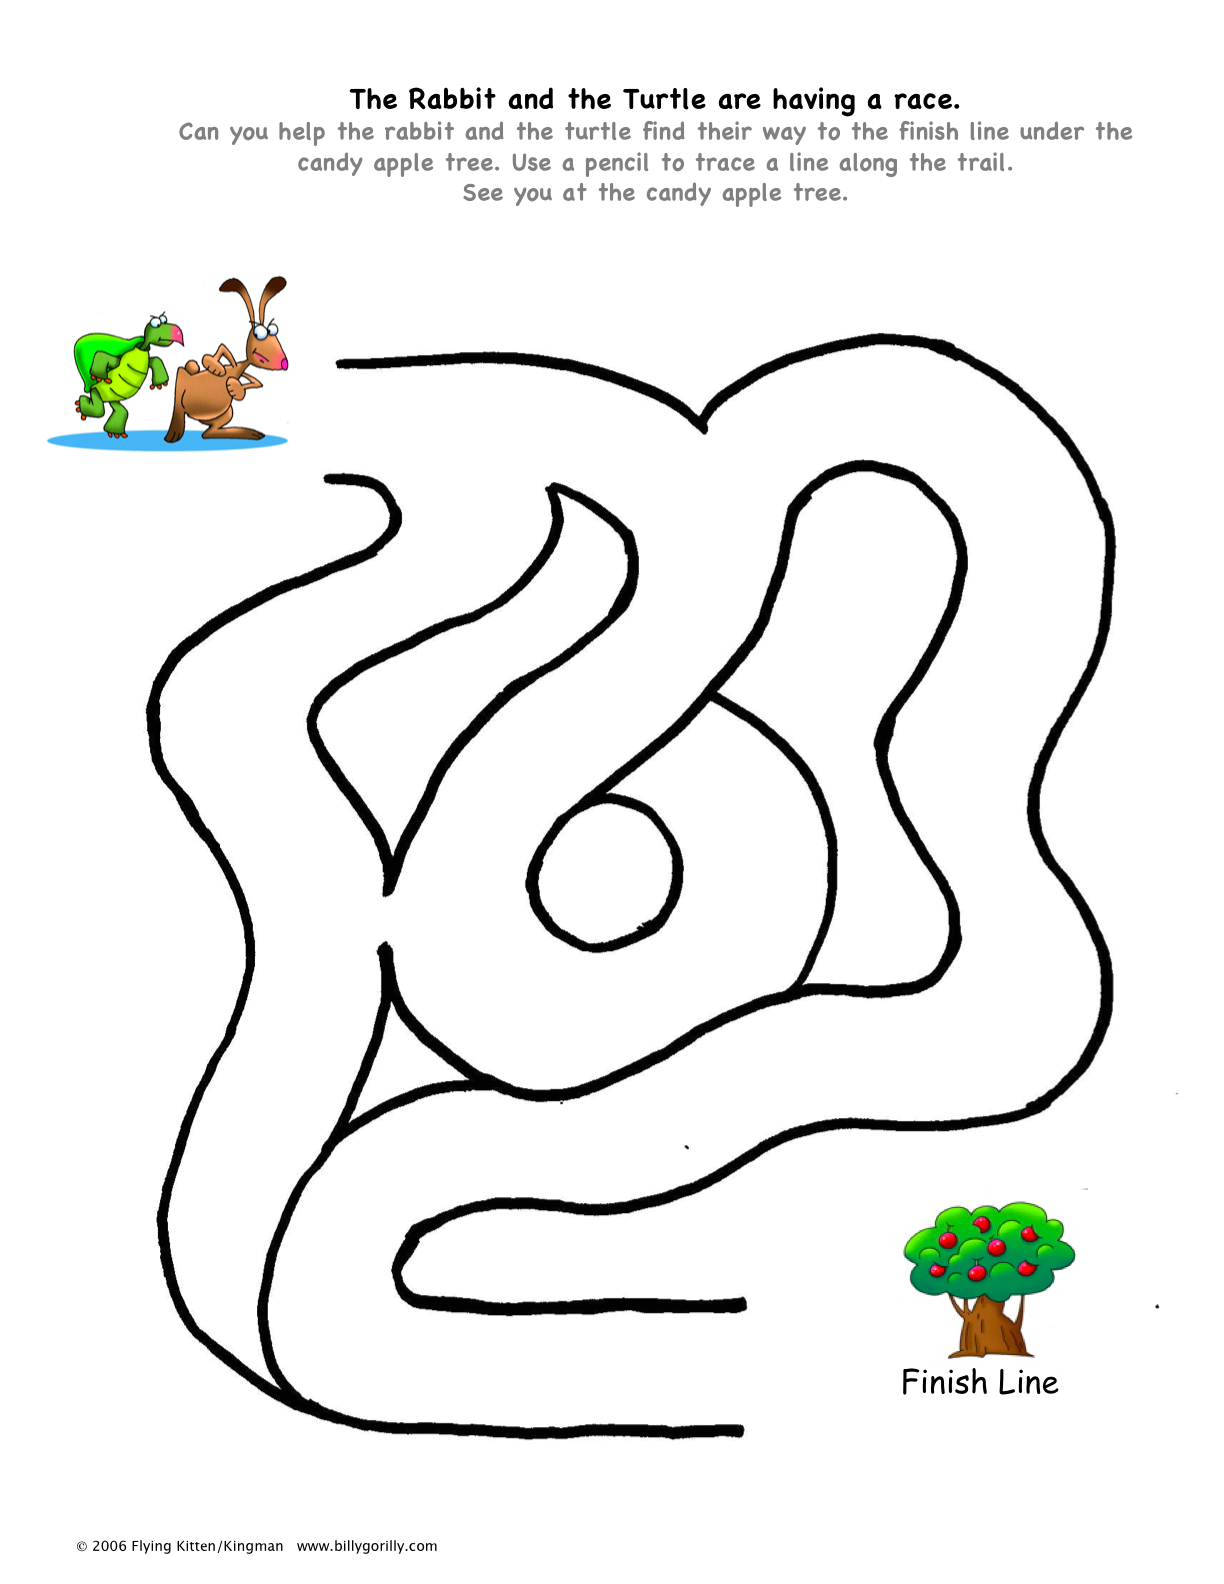 Click to download Easy Maze